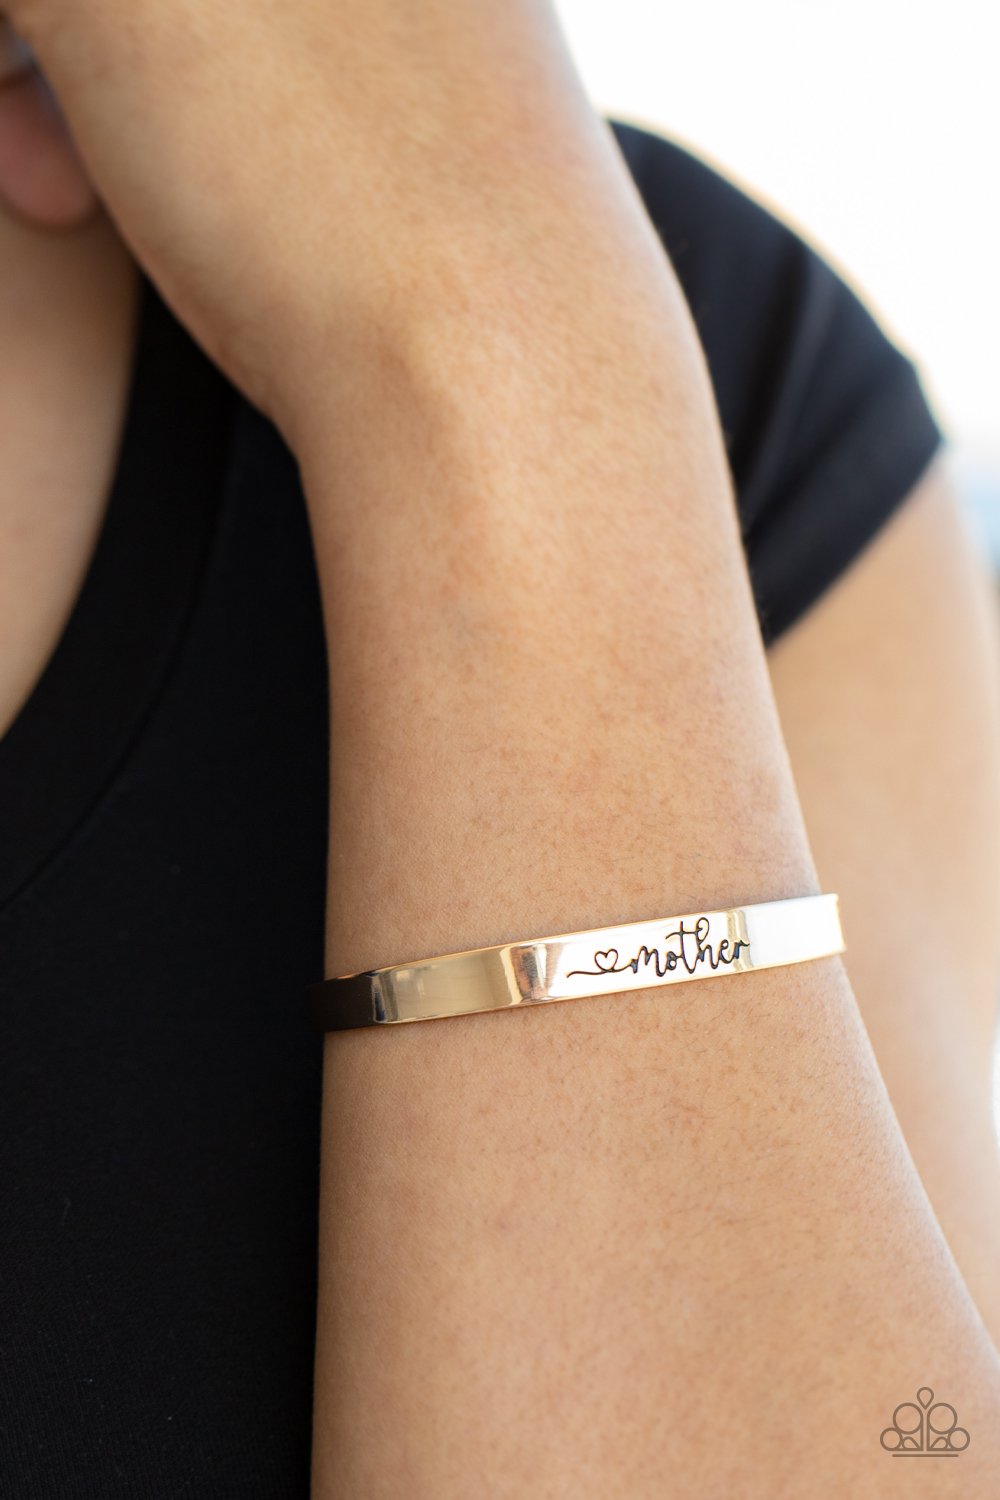 &lt;p&gt; &lt;/p&gt;&lt;p&gt;Ordered on April 9, 2021&lt;/p&gt;&lt;p&gt;&lt;br&gt;&lt;/p&gt;&lt;p&gt;A dainty gold cuff is stamped in a heart and the word, \&quot;Mother,\&quot; creating a sentimental centerpiece around the wrist.&lt;/p&gt;  
 

 &lt;p&gt; &lt;i&gt;Sold as one individual bracelet.&lt;/i&gt; &lt;/p&gt;
 

 

&lt;h5&gt;Paparazzi Accessories • $5 Jewelry&lt;/h5&gt;